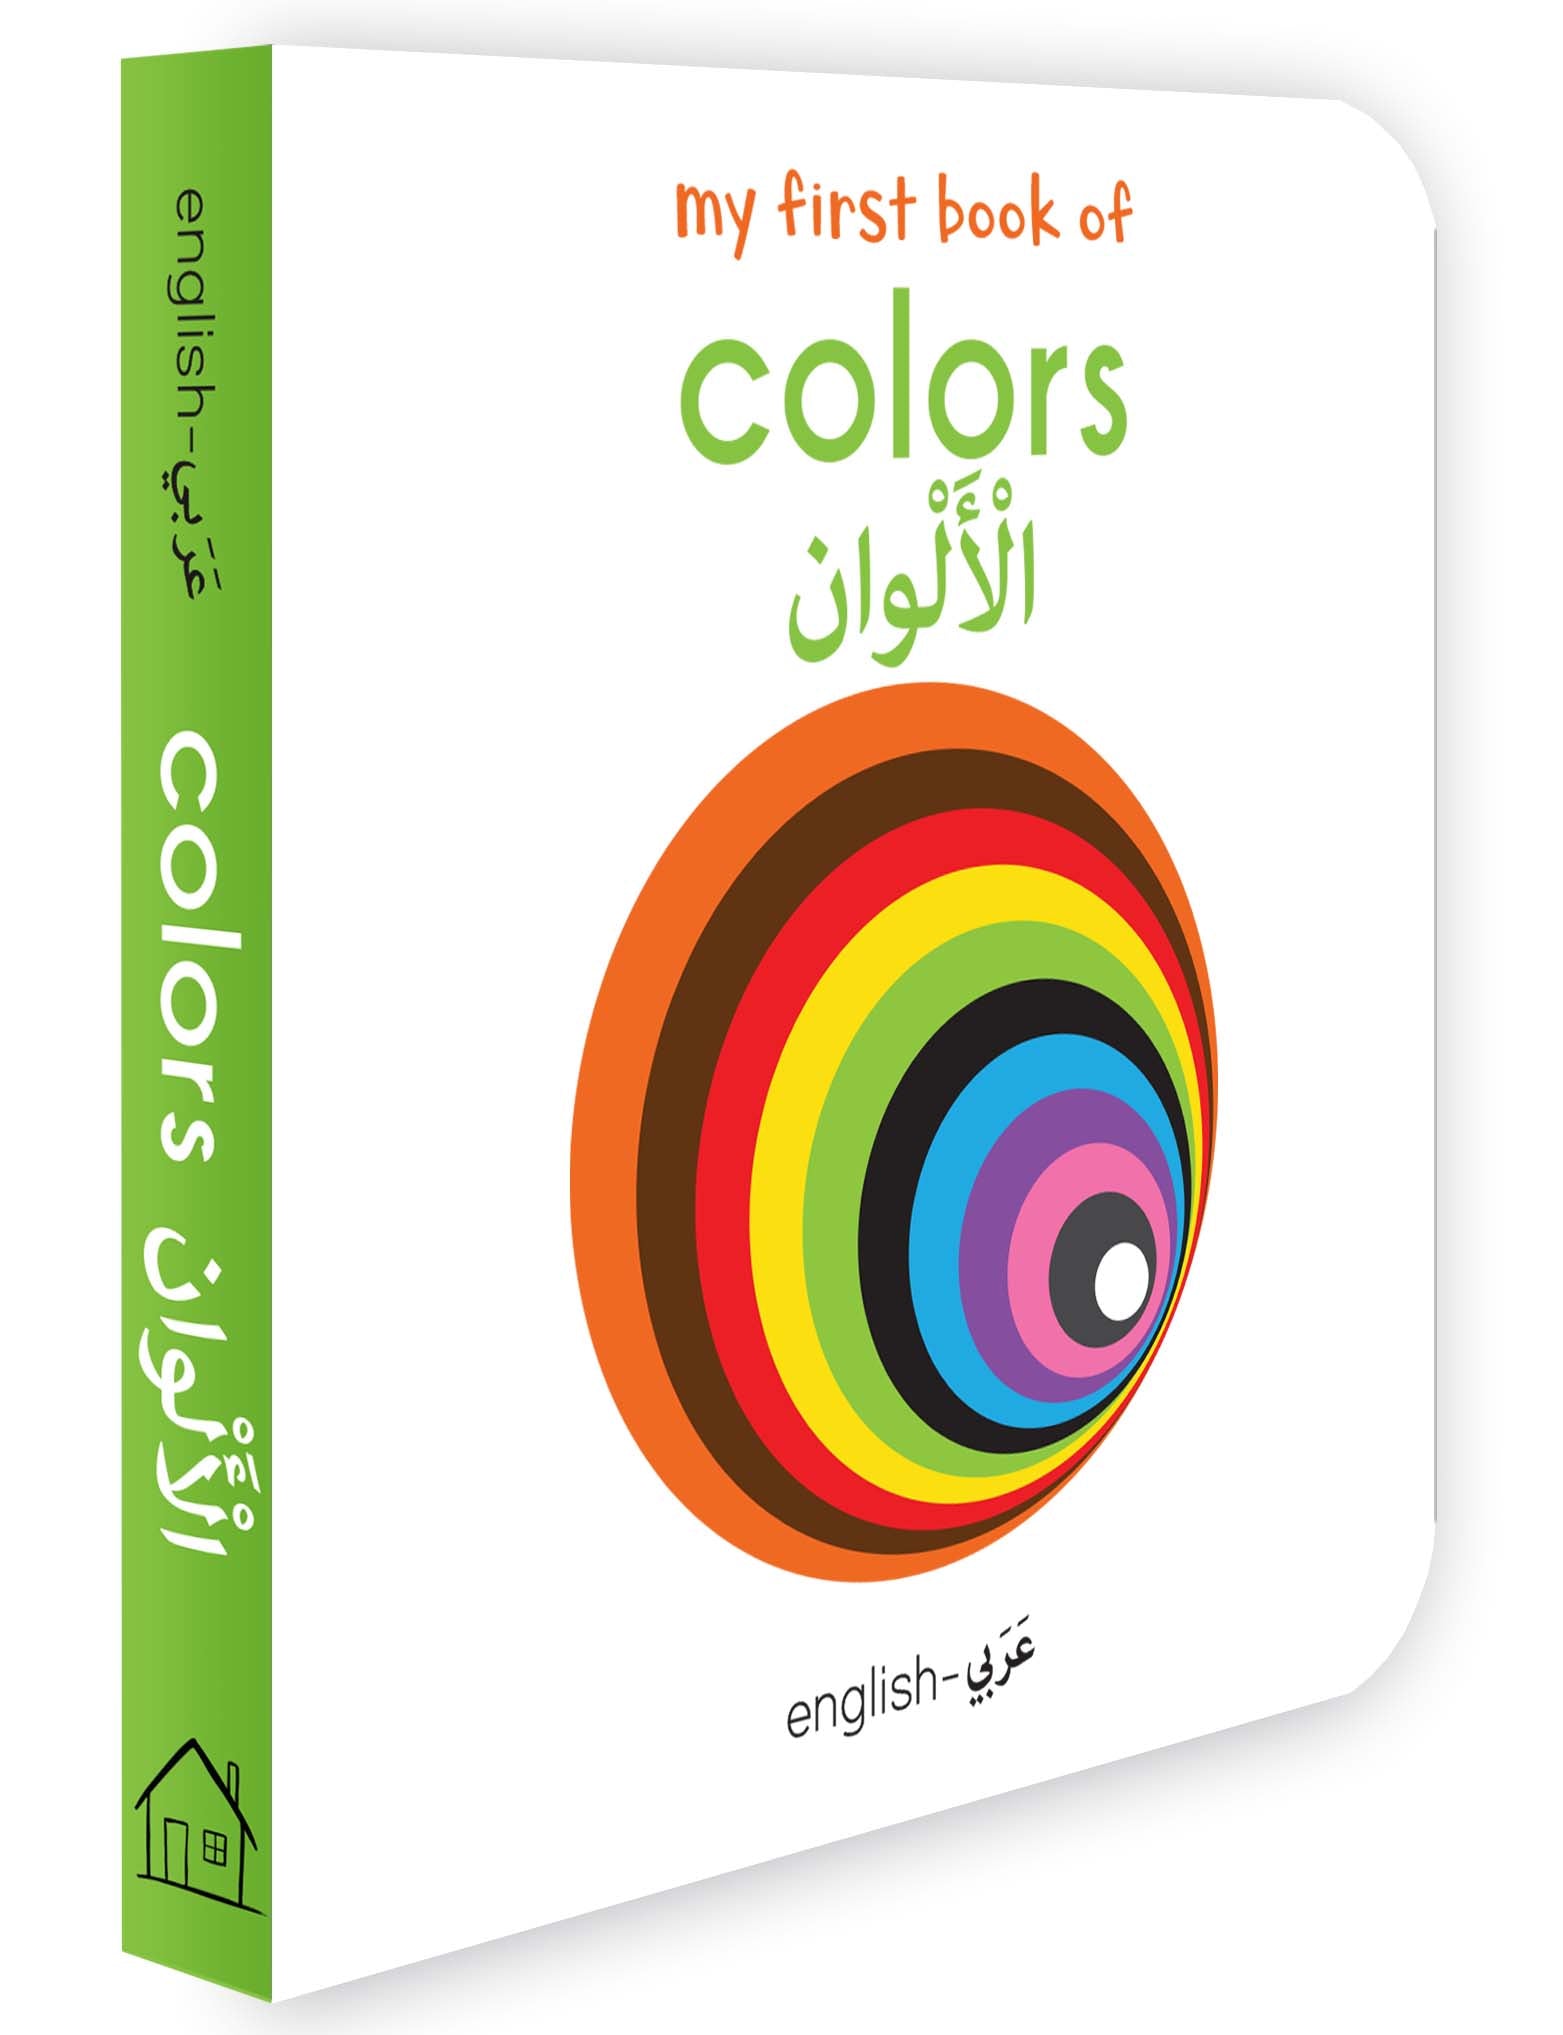 My First Book of Colors (English-Arabic) - Bilingual Learning Library